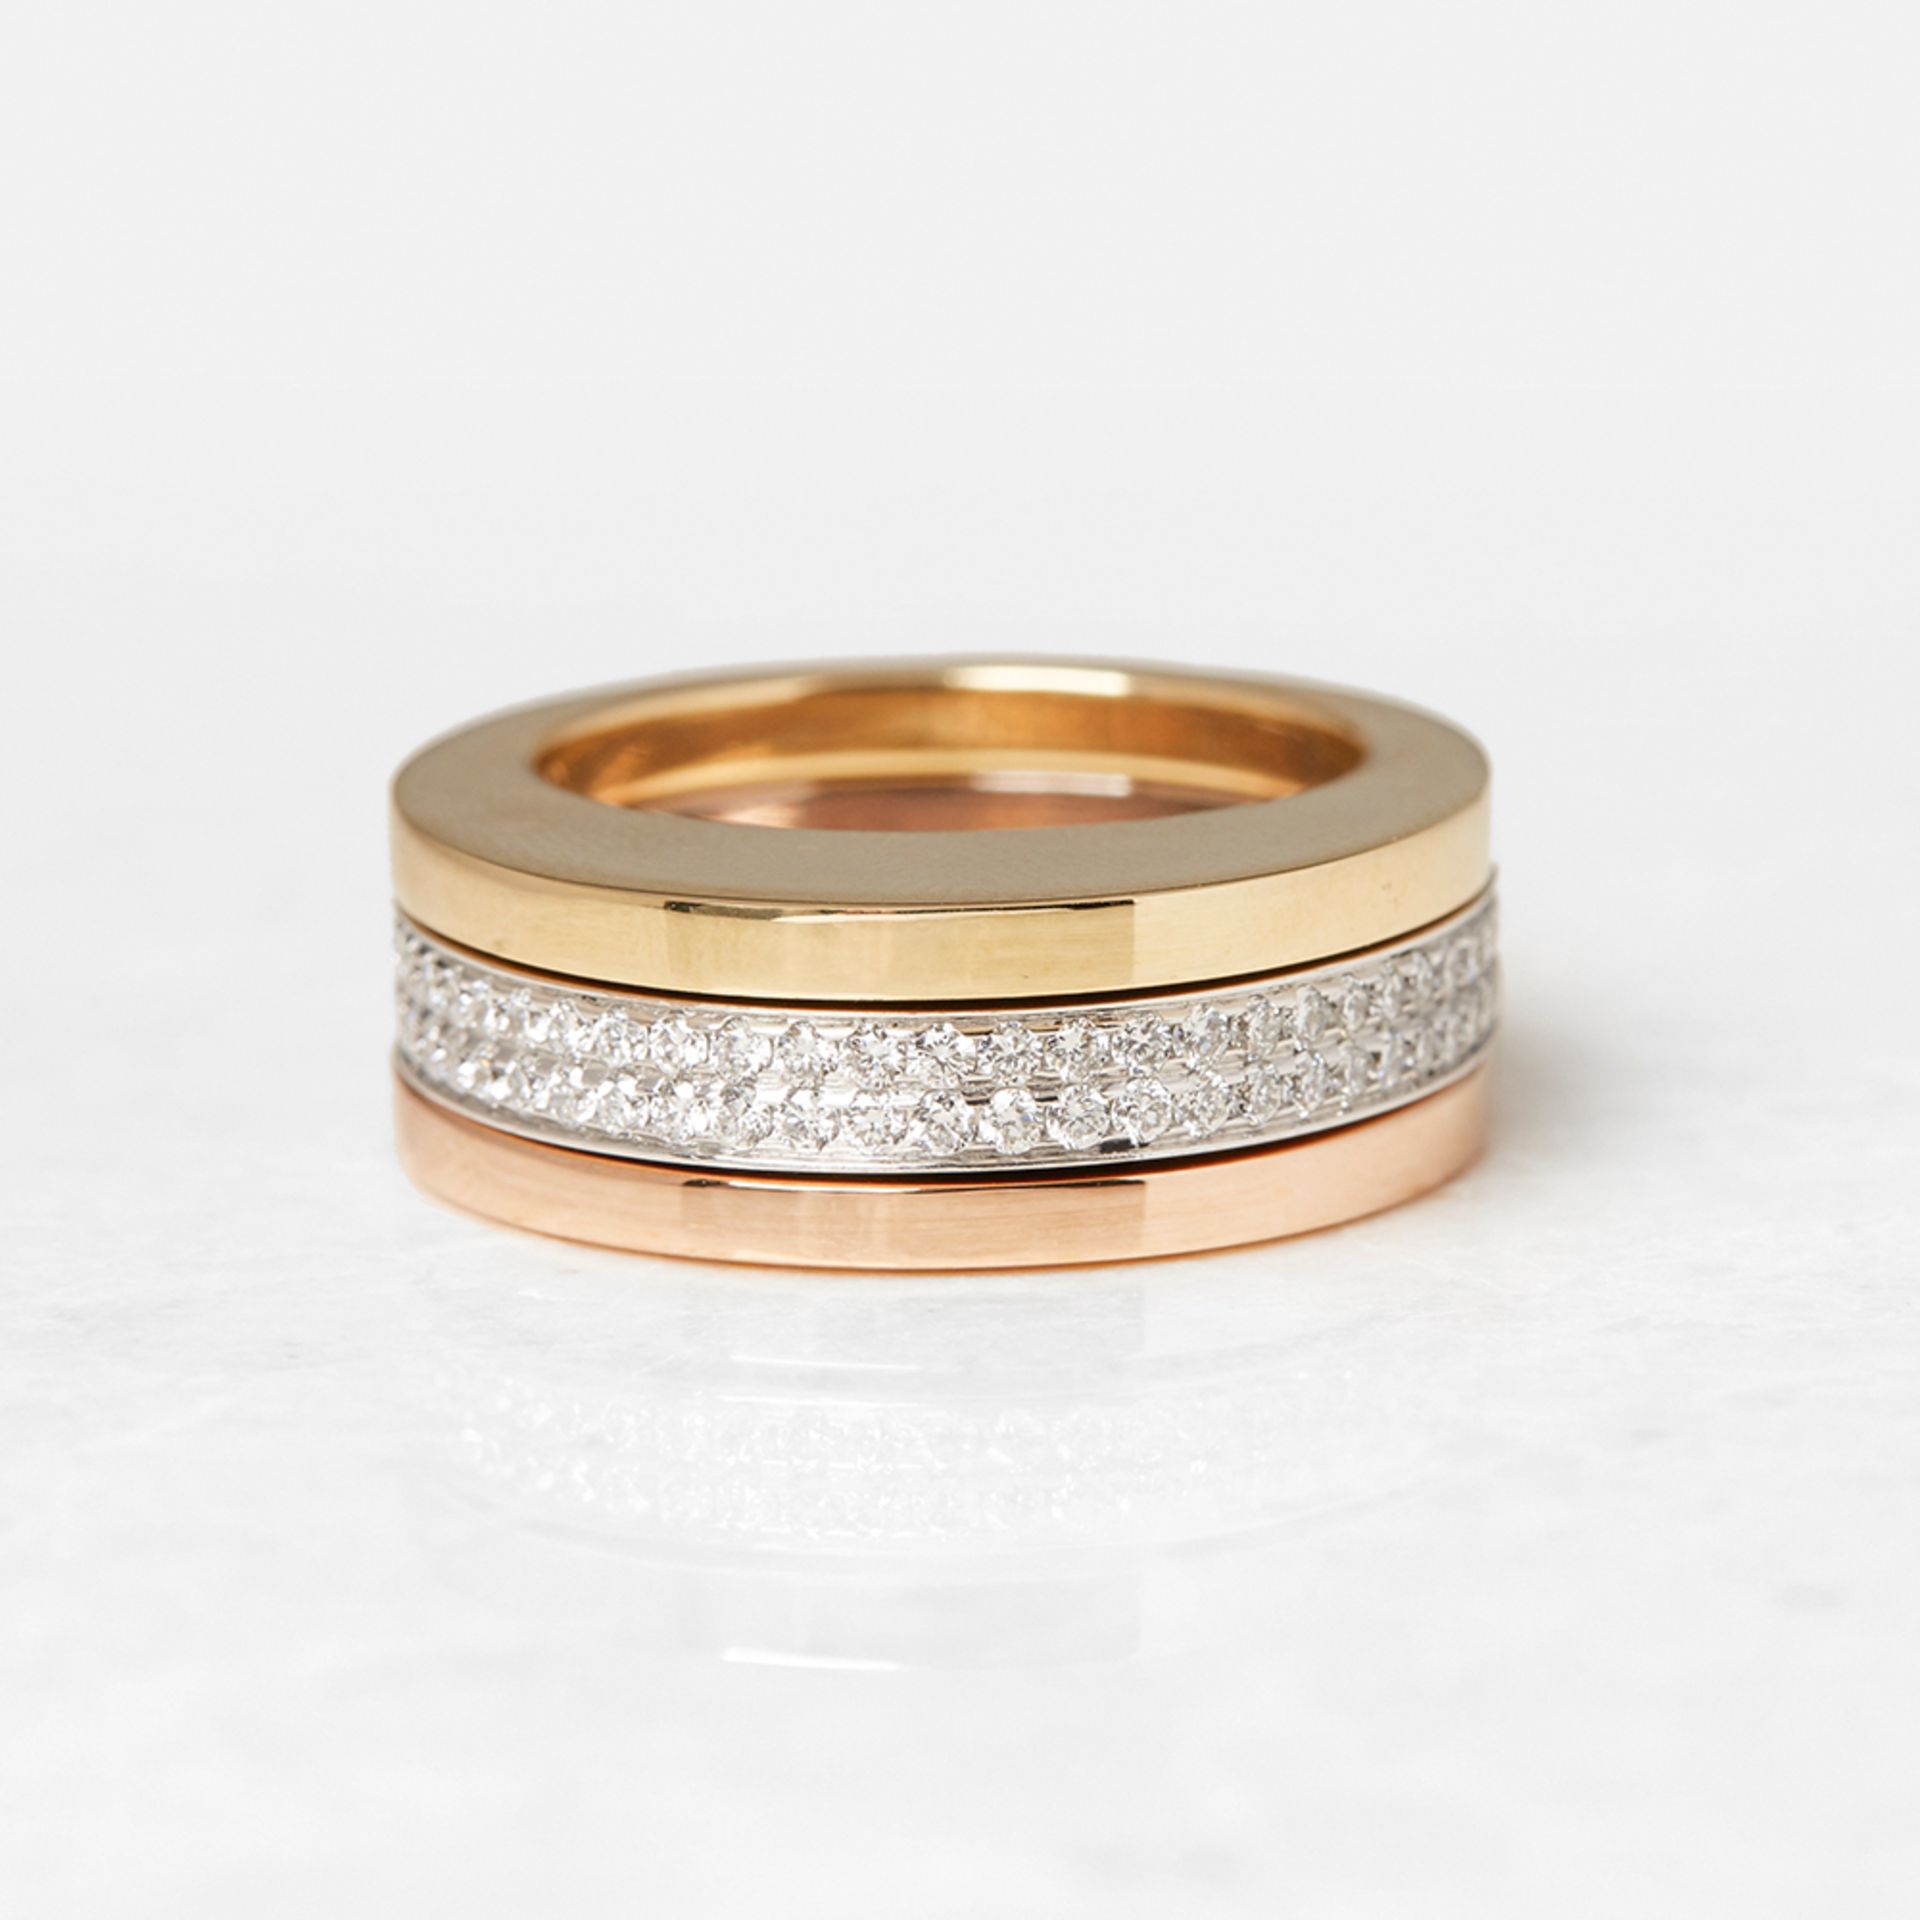 Tiffany & Co. 18k White, Rose & Yellow Gold Stackable Rings - Image 2 of 7